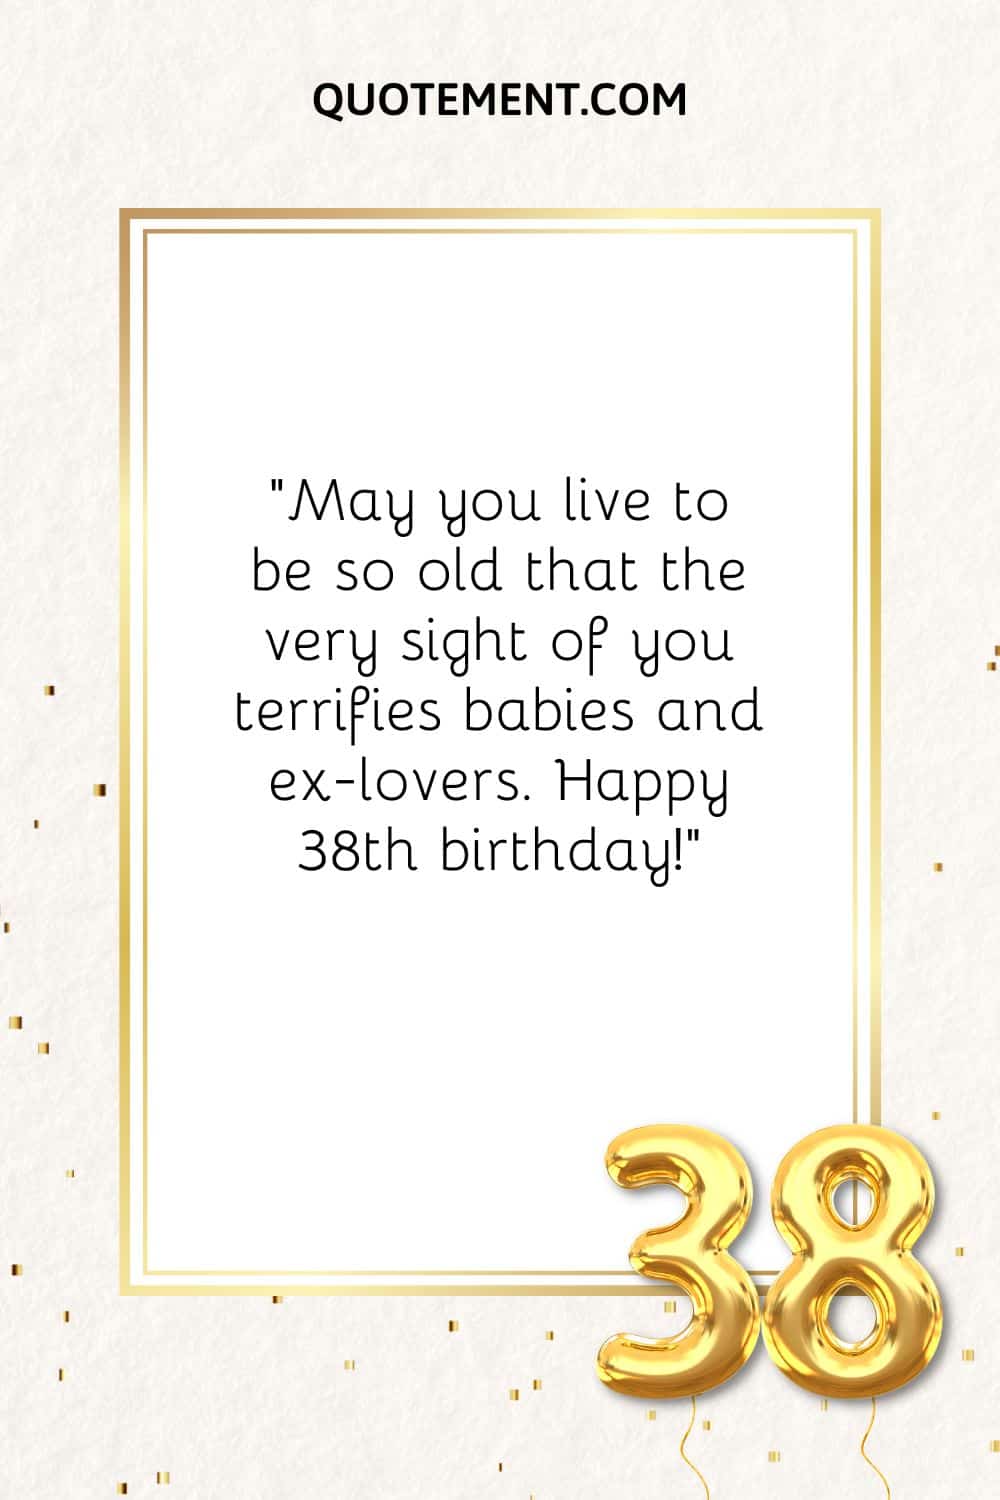 May you live to be so old that the very sight of you terrifies babies and ex-lovers